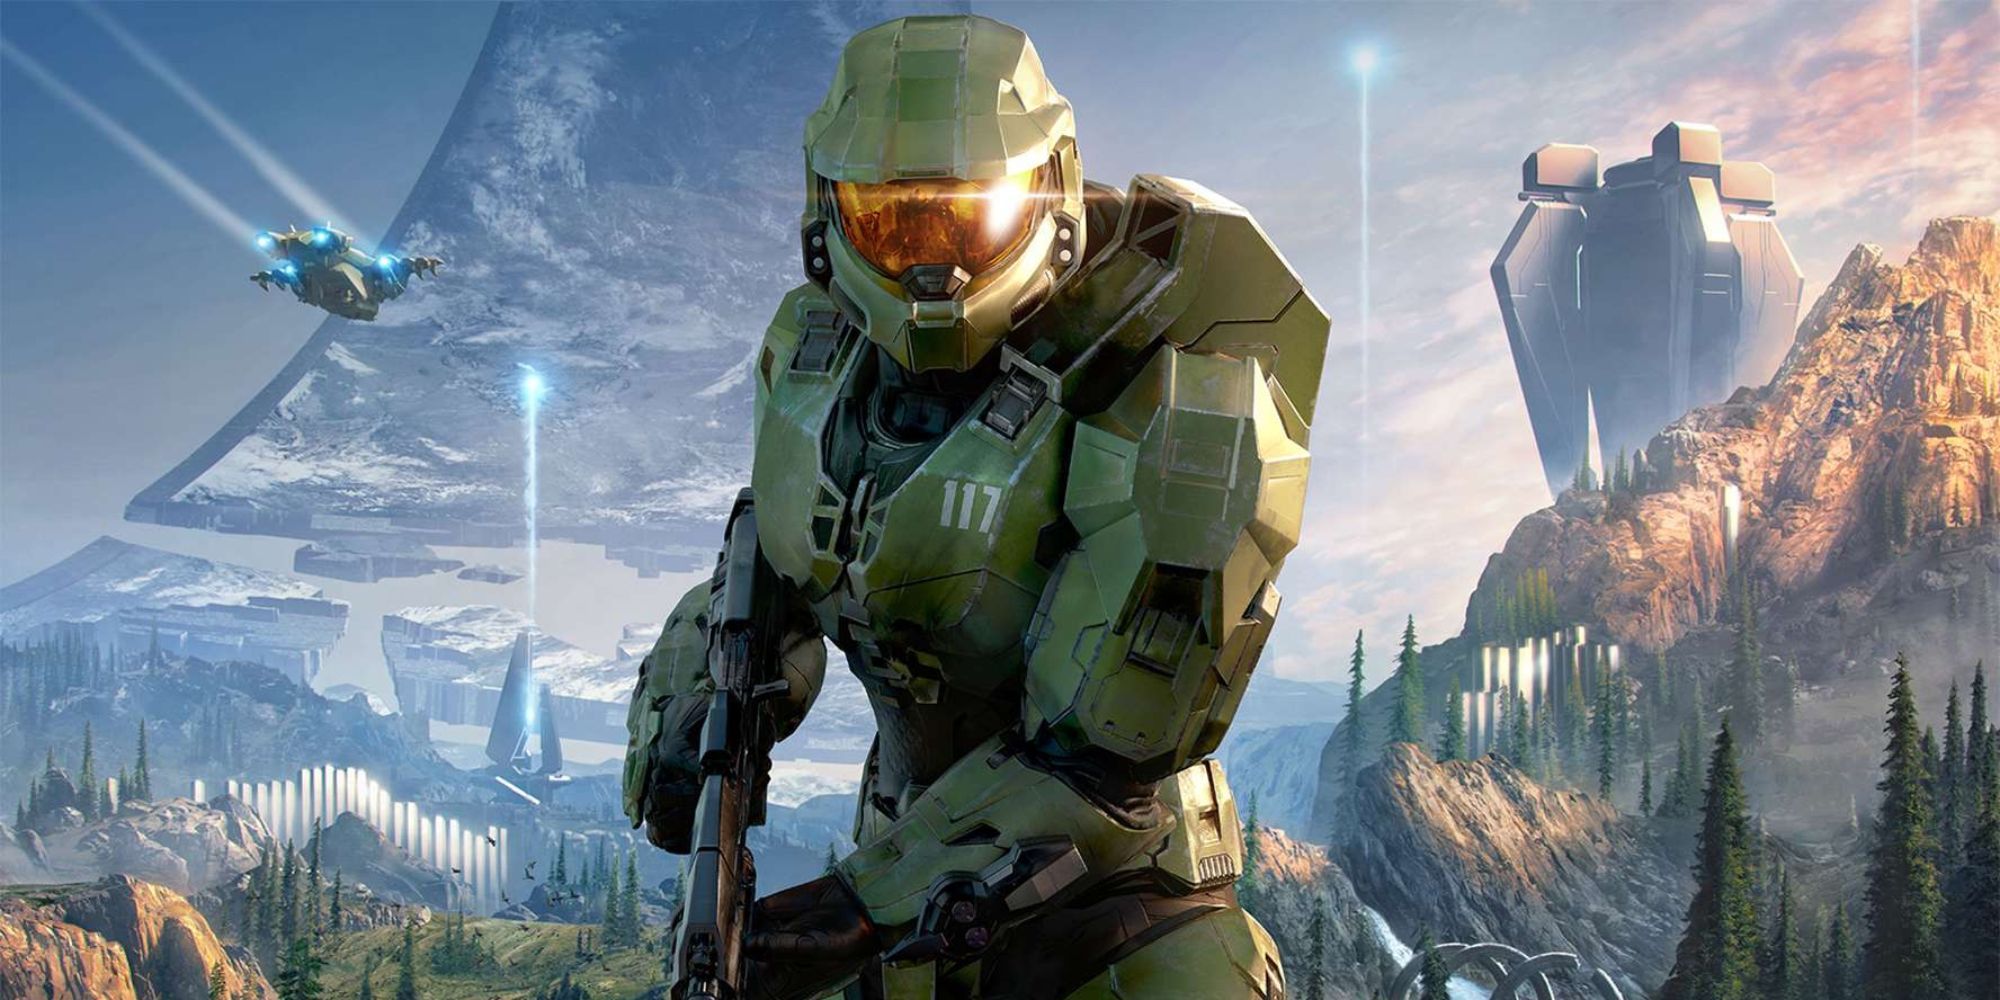 Master Chief stands on the cover of Halo Infinite.